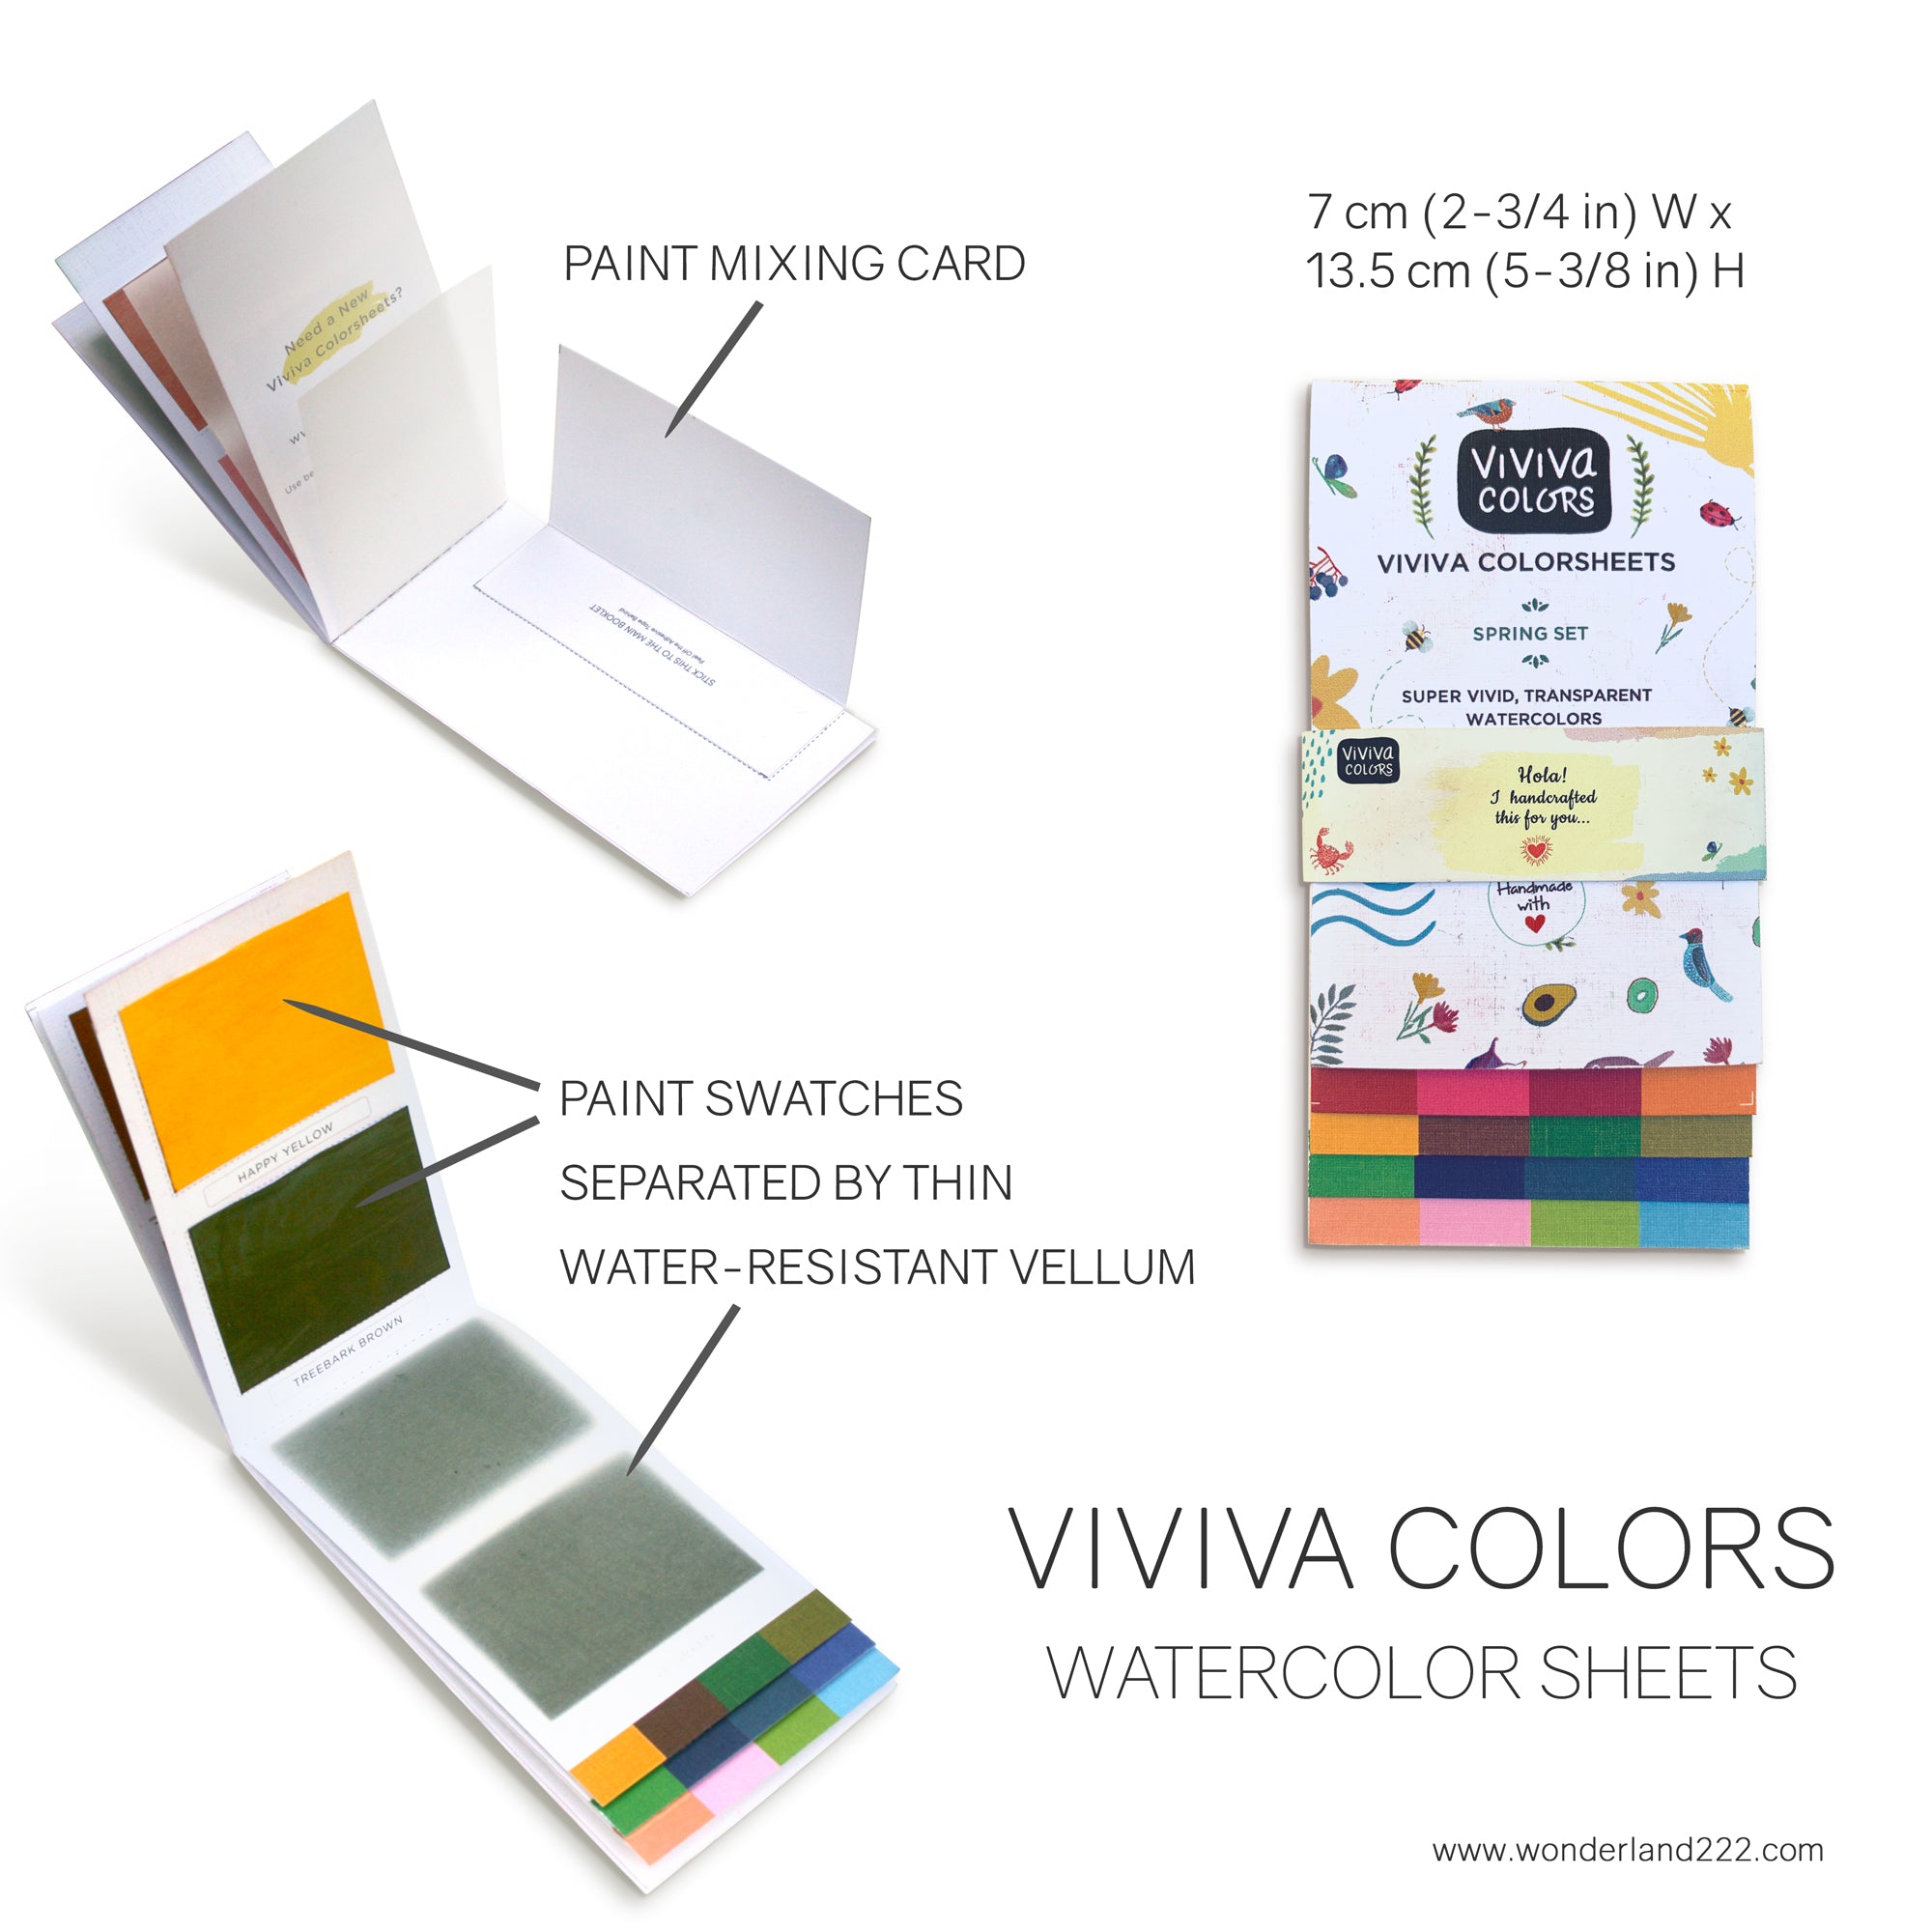 Viviva ColorSheets is a Portable Watercolor Kit for Artists-On-The-Go